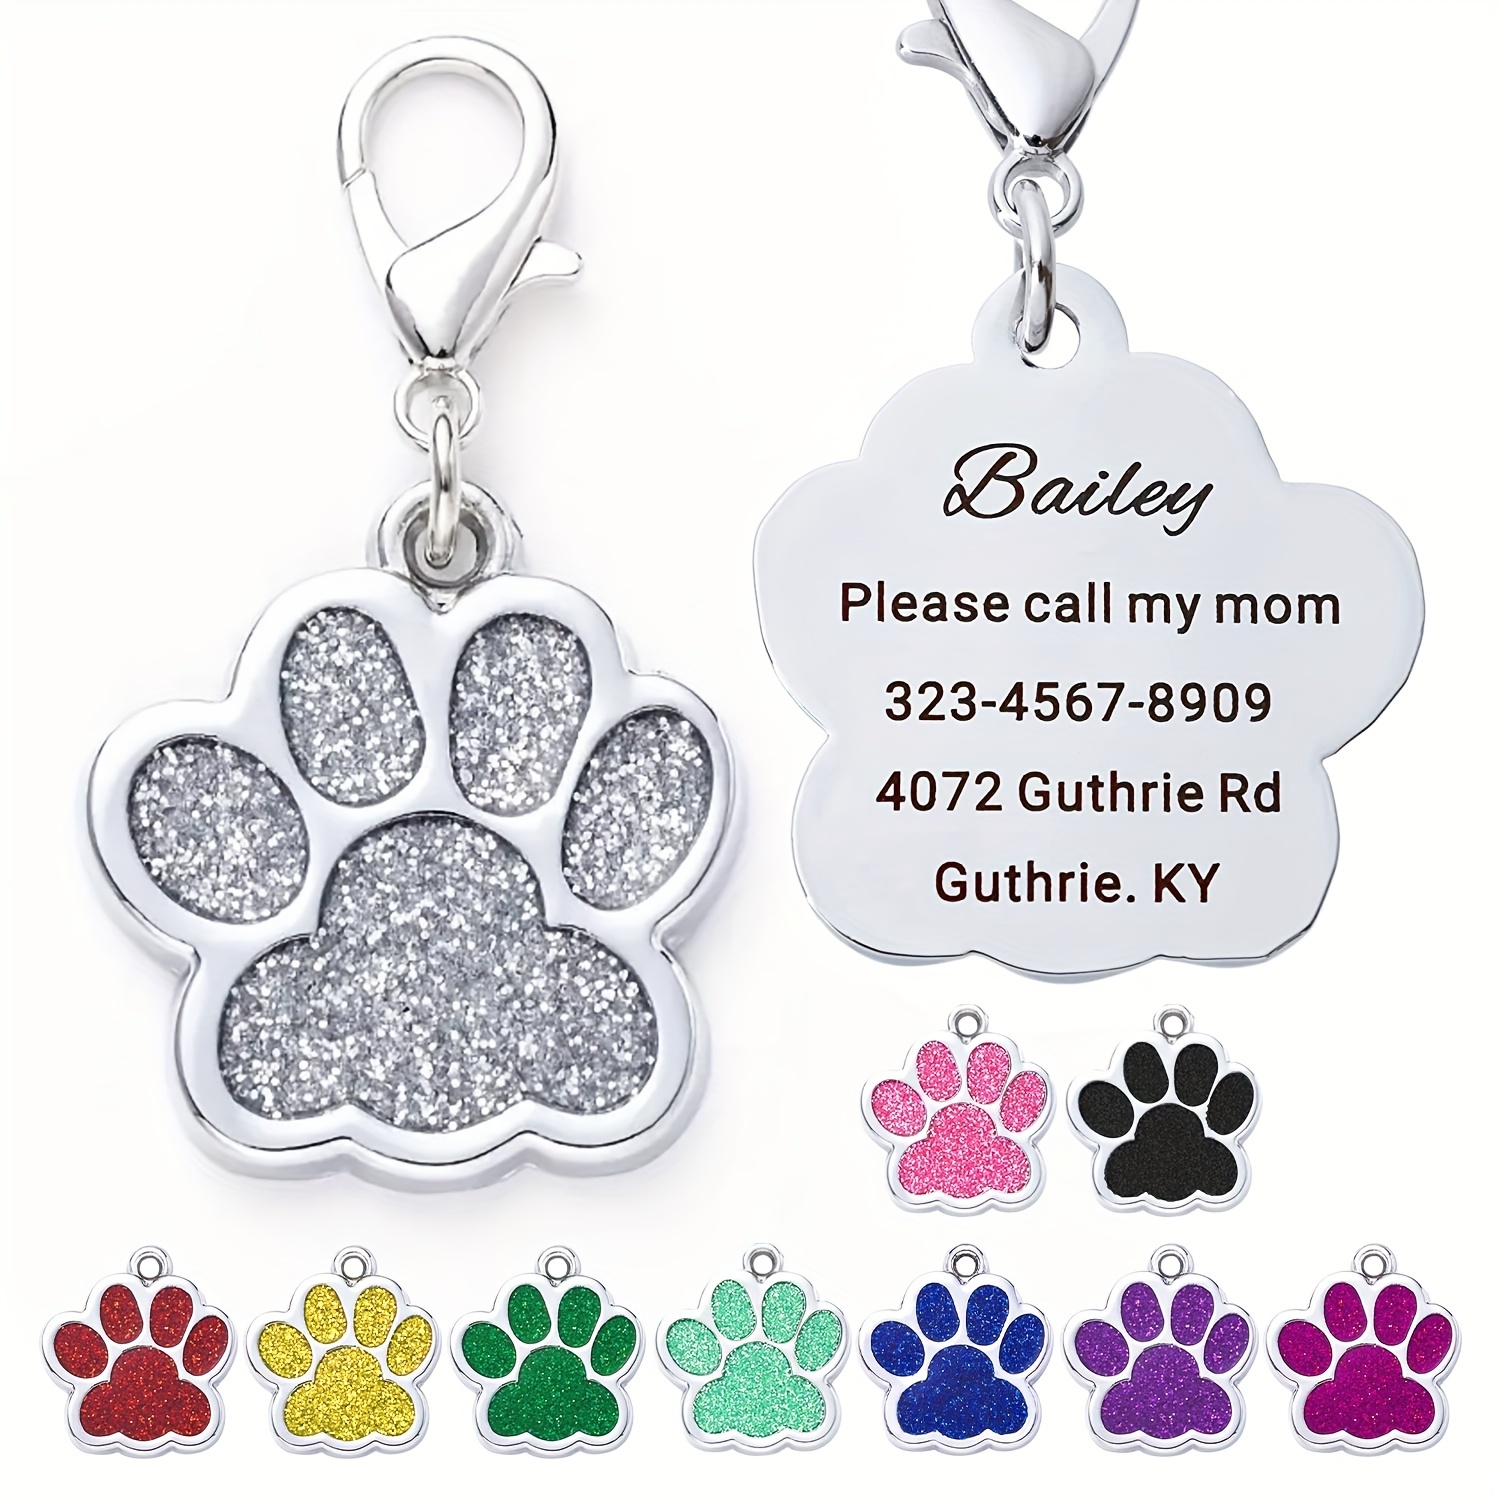 

Custom Engraved Dog & Cat Id Tags - Personalize With Your Pet's Name!